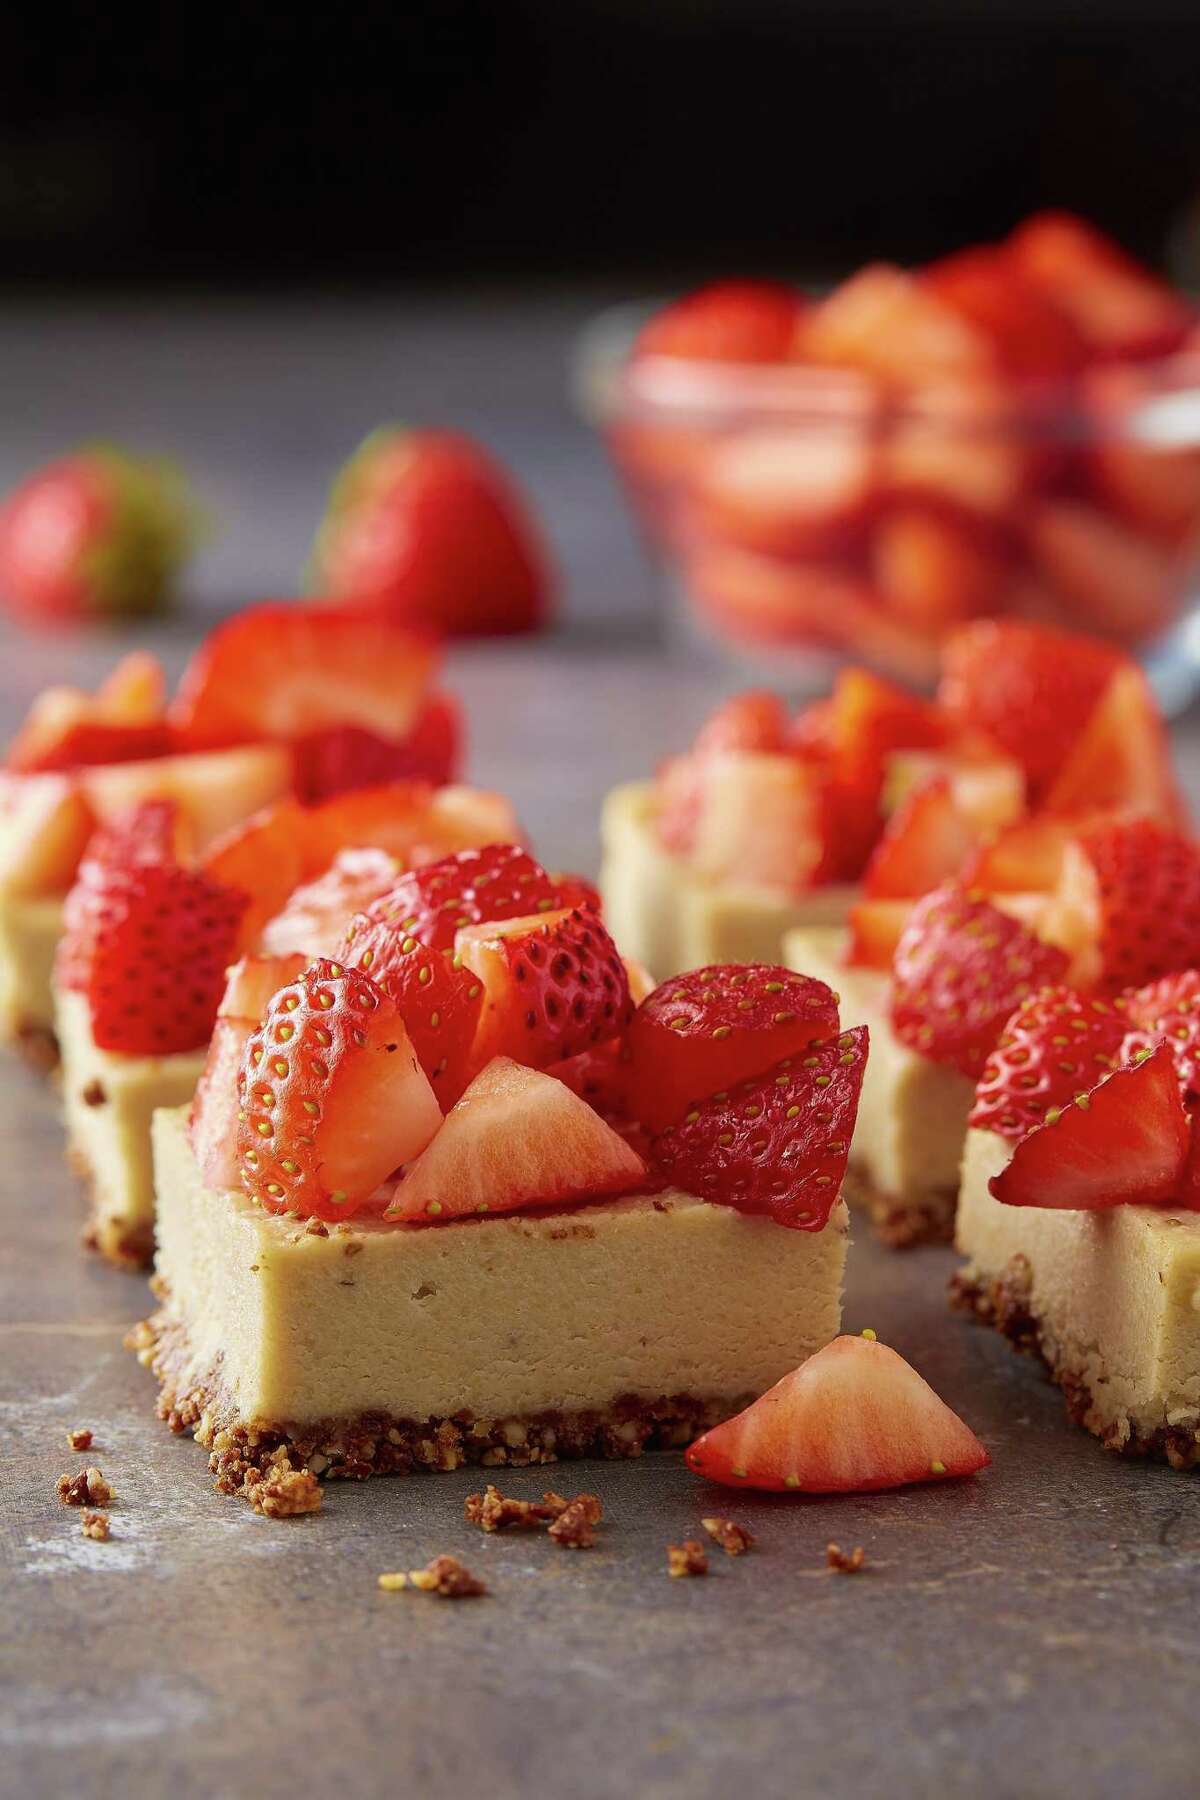 Chocolate Crusted Strawberry Cheesecake from “Fit Men Cook” by Kevin Curry